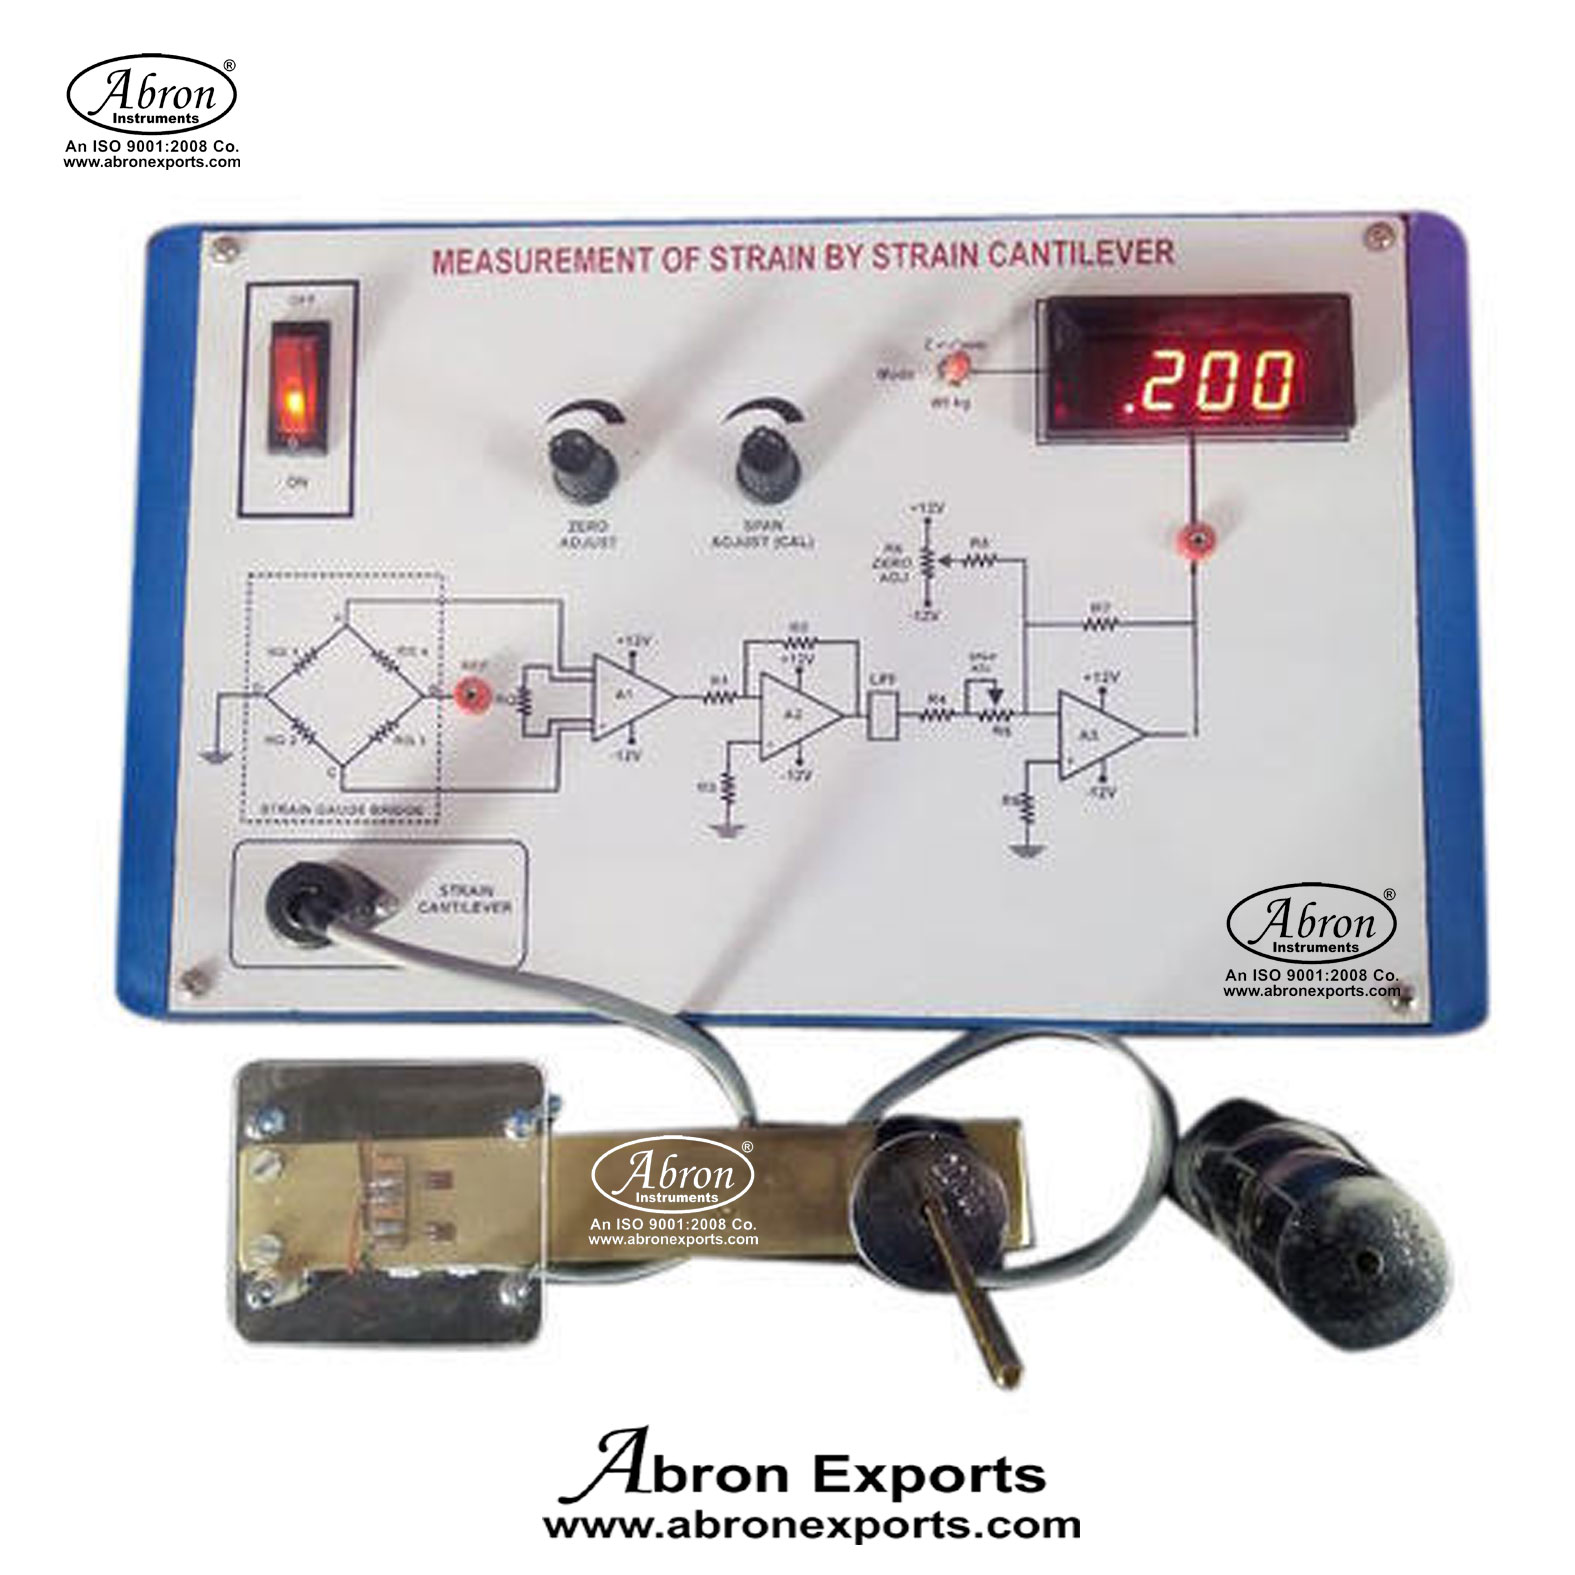 Strain Gauge Digital Trainer With Cantilever Kit Abron AE-1327STD